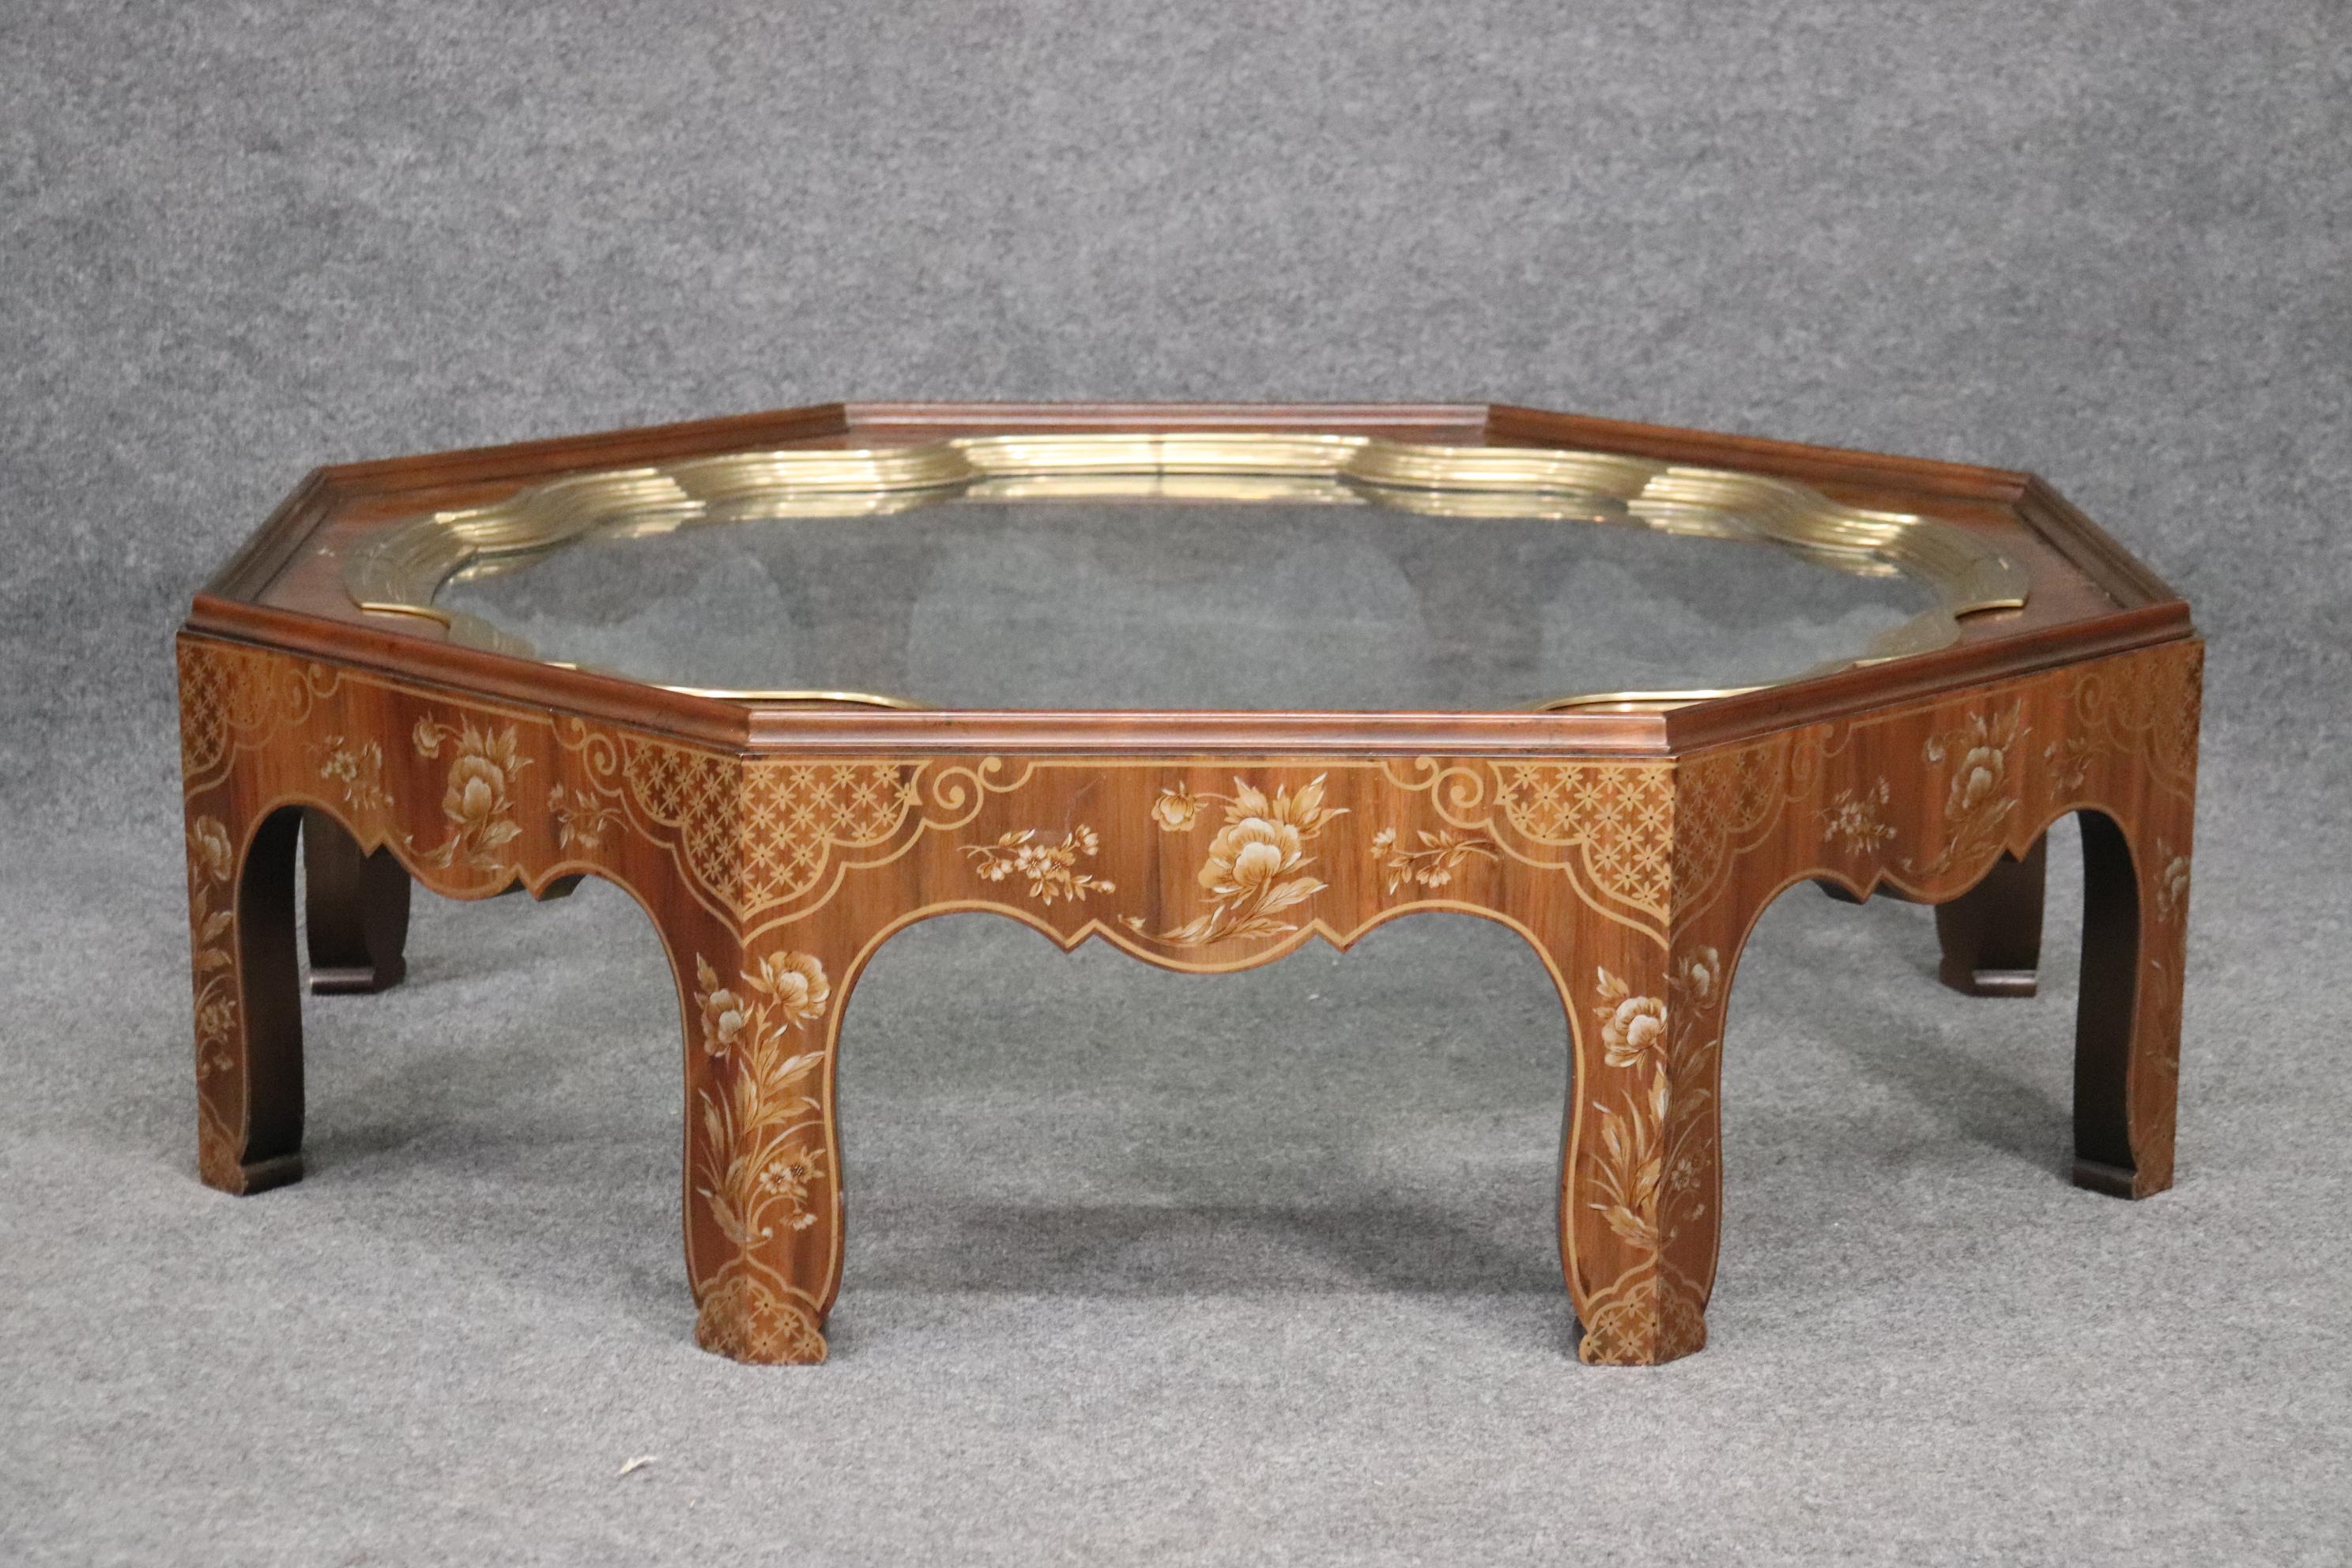 This is a classic Baker collector's edition tray top coffee gtable designed in the Chinese chinoiserie taste. The table is in good original condition with minor signs of age and wear from use. The table measures 49 wide x 49 deep x 15 inches tall.